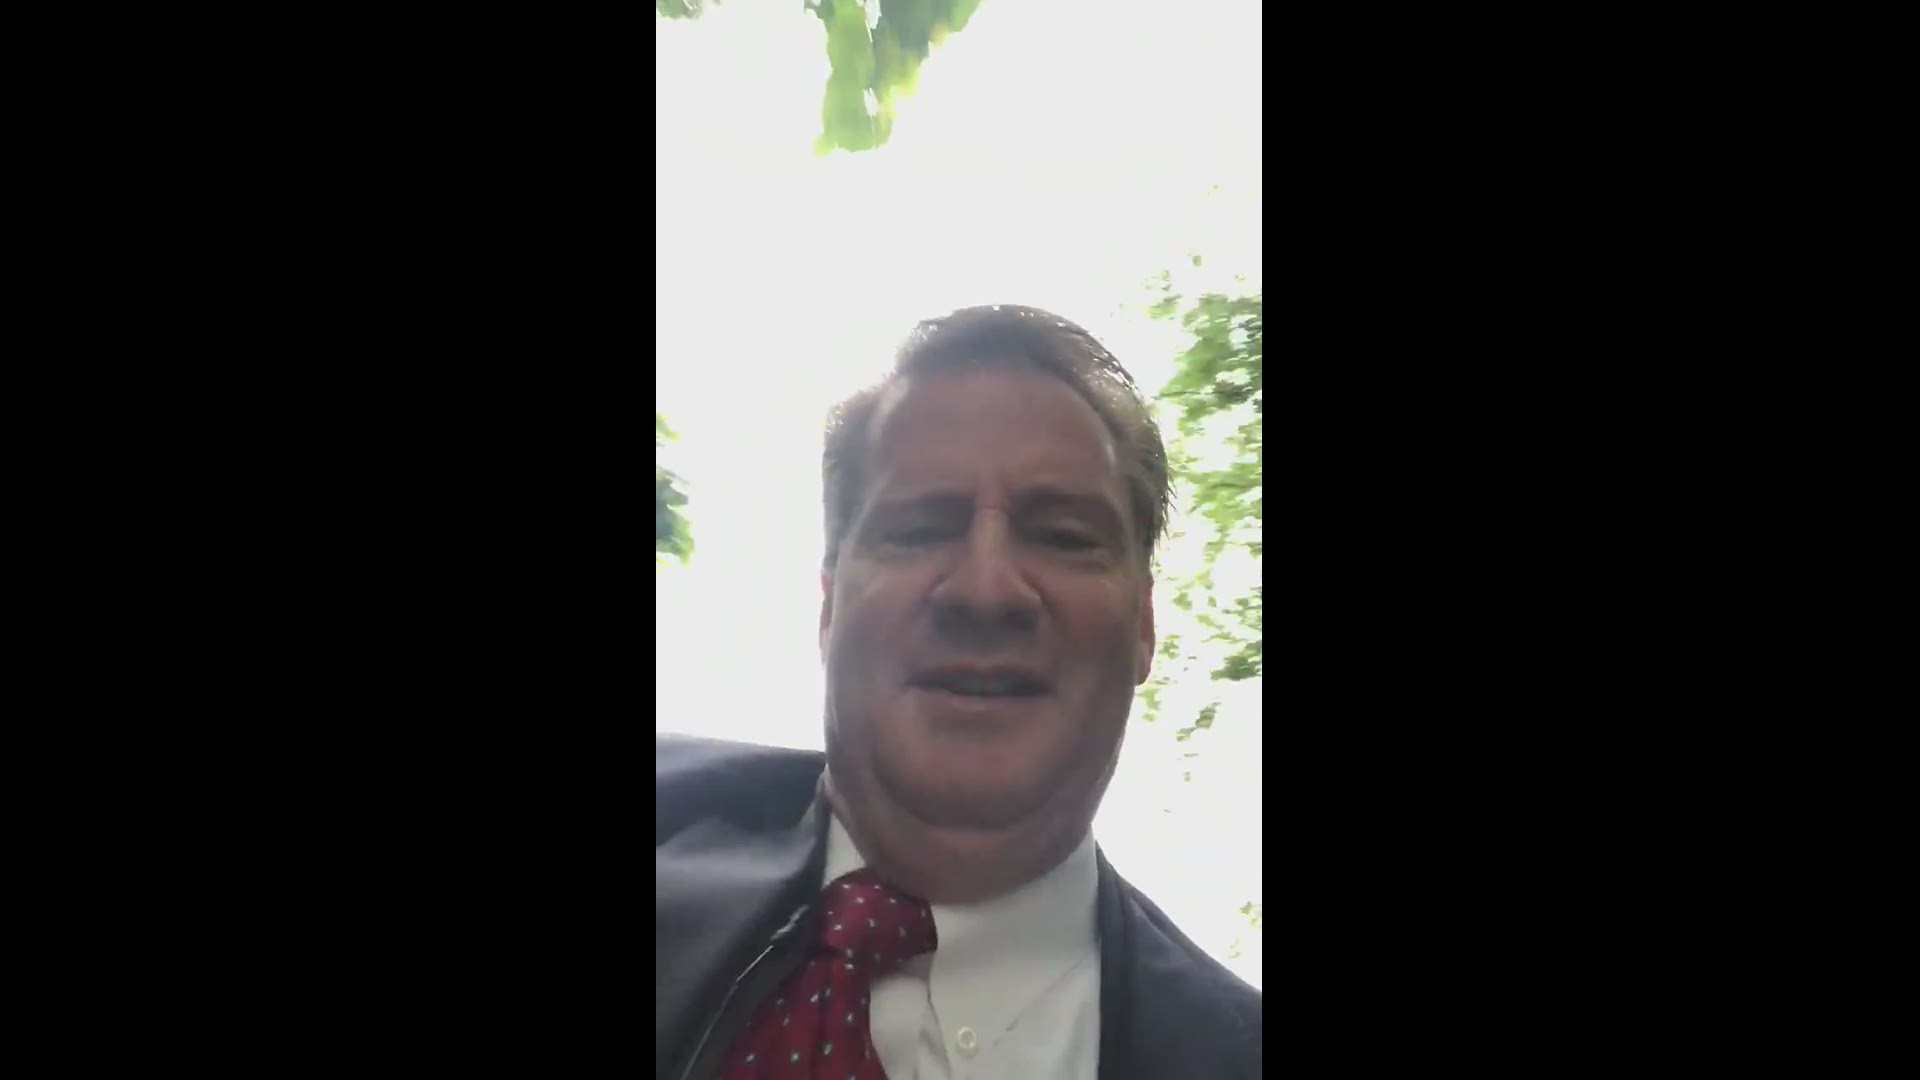 Tennessee Congressman Tim Burchett took to Twitter Friday morning with another update from the Capitol and this time it involved a swamp creature... quite literally.